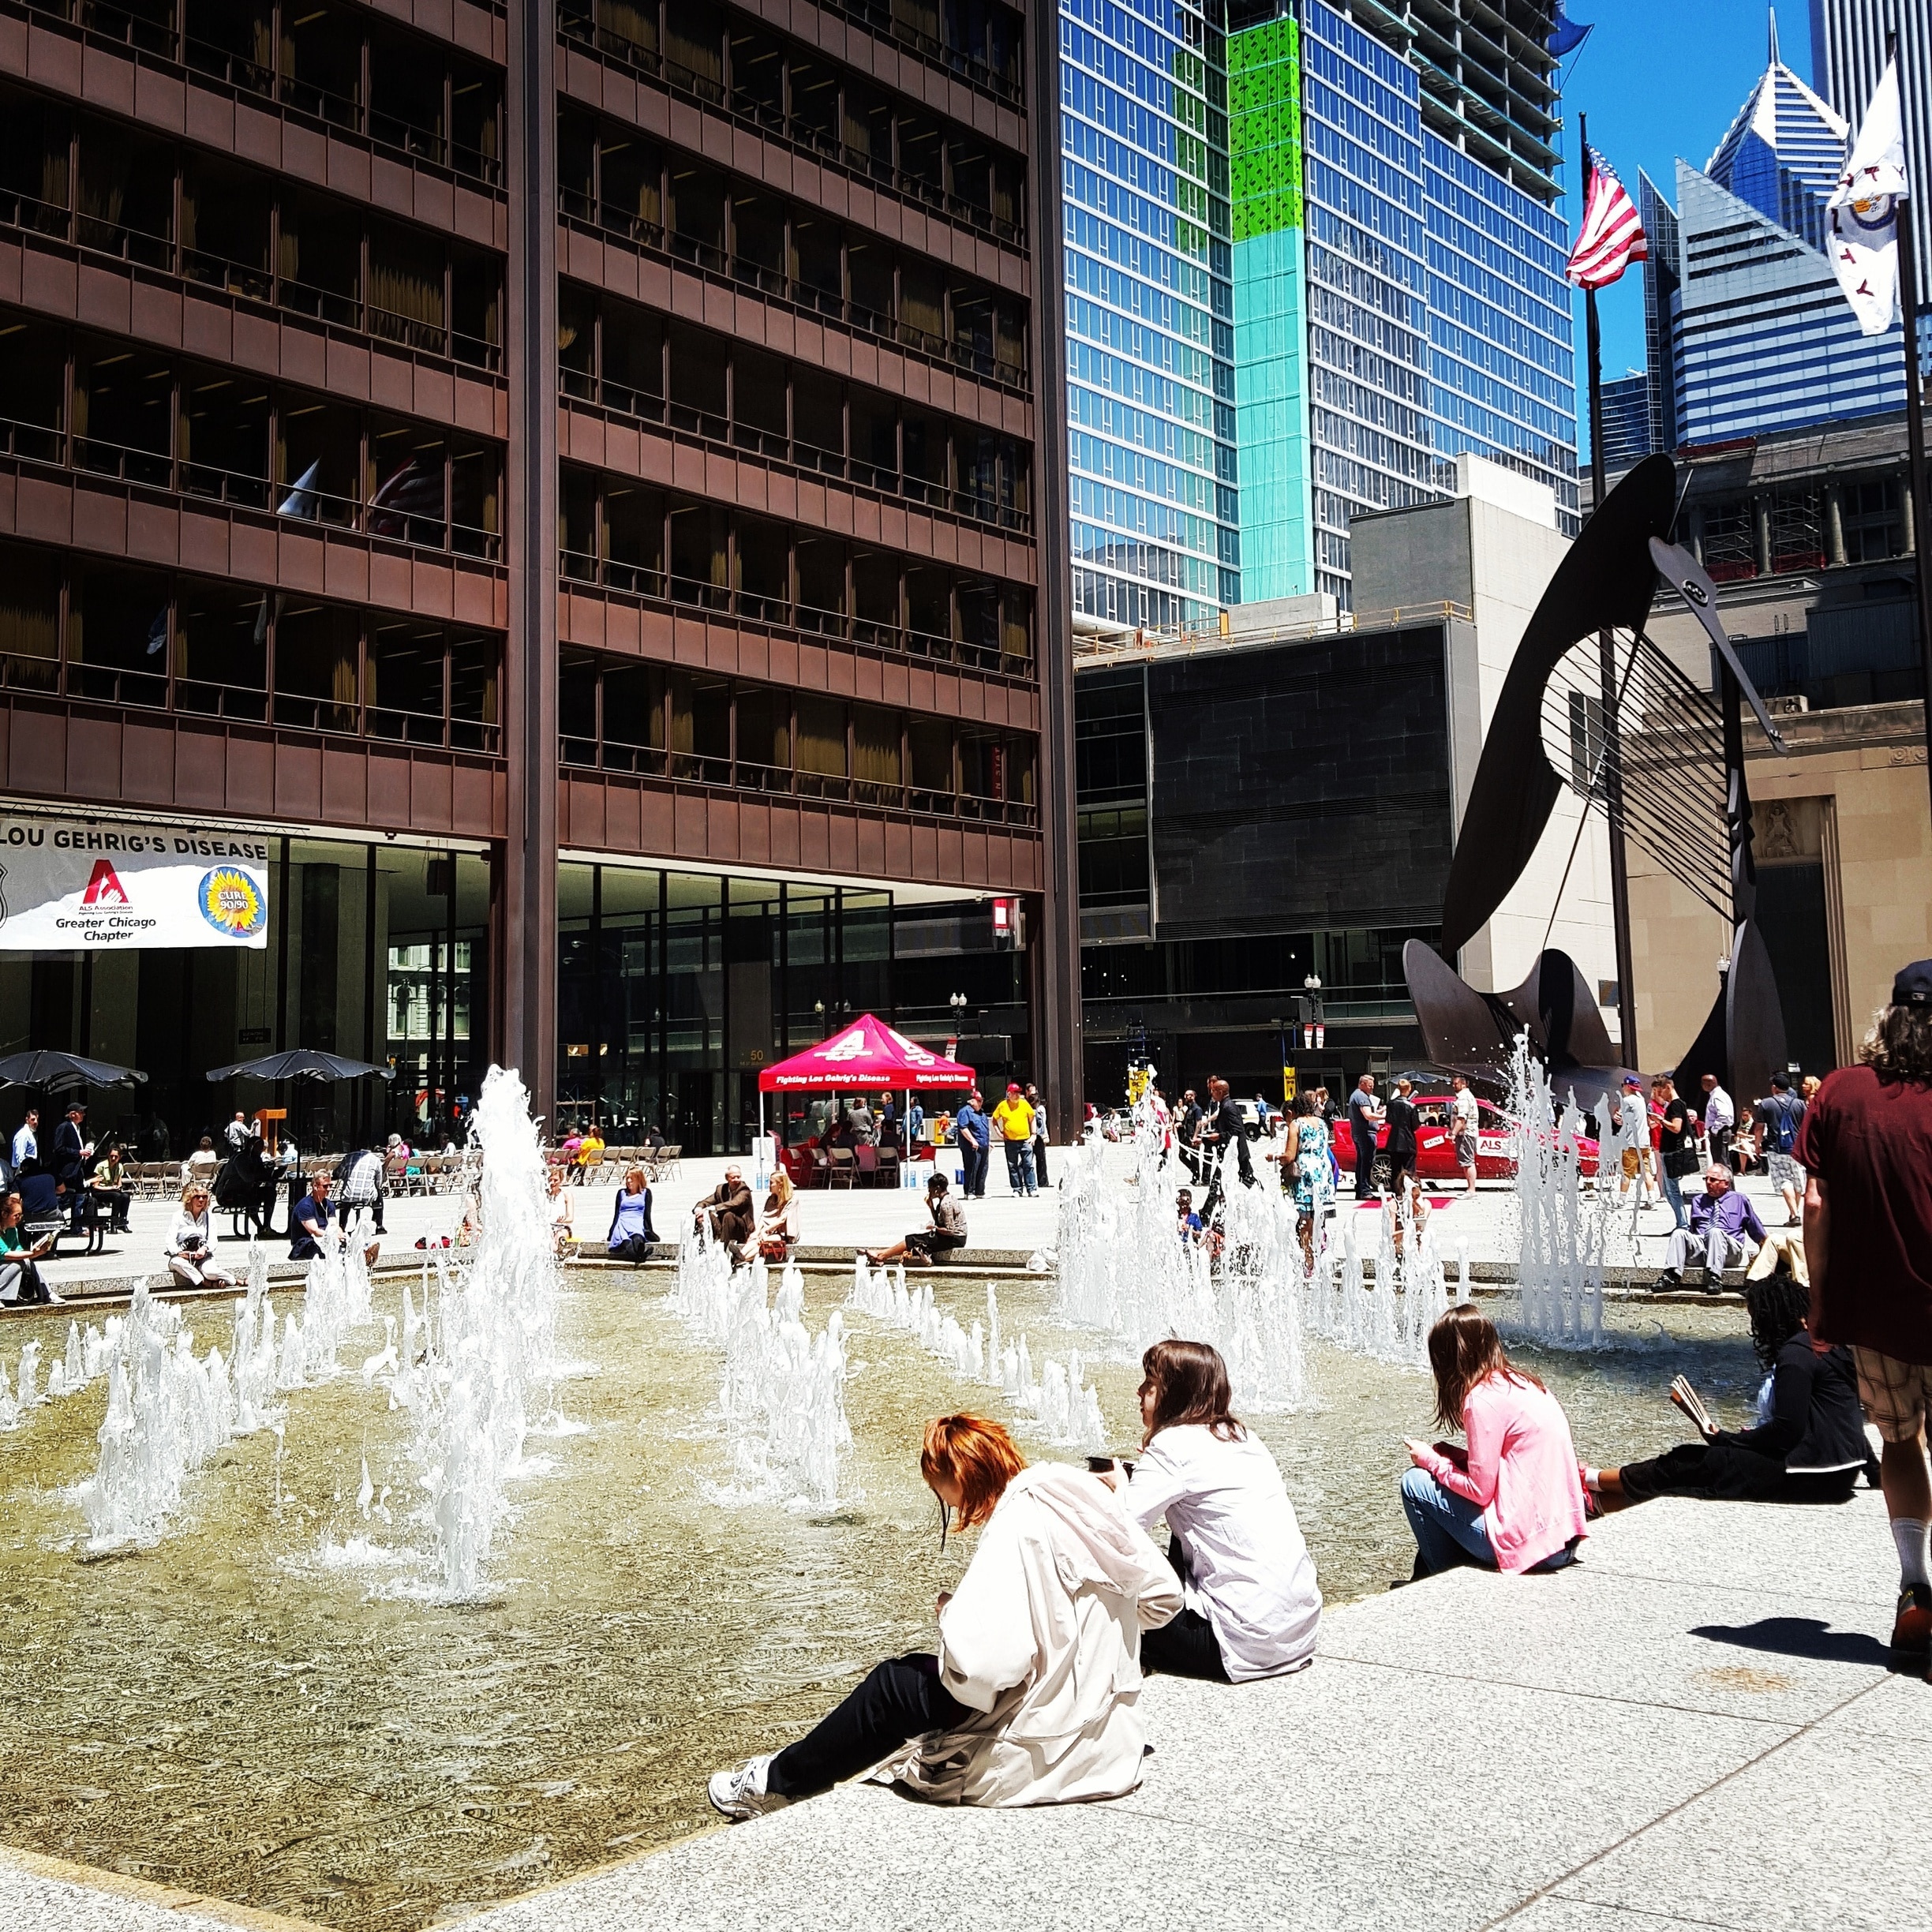 Is it a hot summer day in Chicago and you want to see some locals being local? Then look no further than Daley Plaza. There is always something happening on the plaza from rallies to food vendor days. It is also a nice place to people watch.